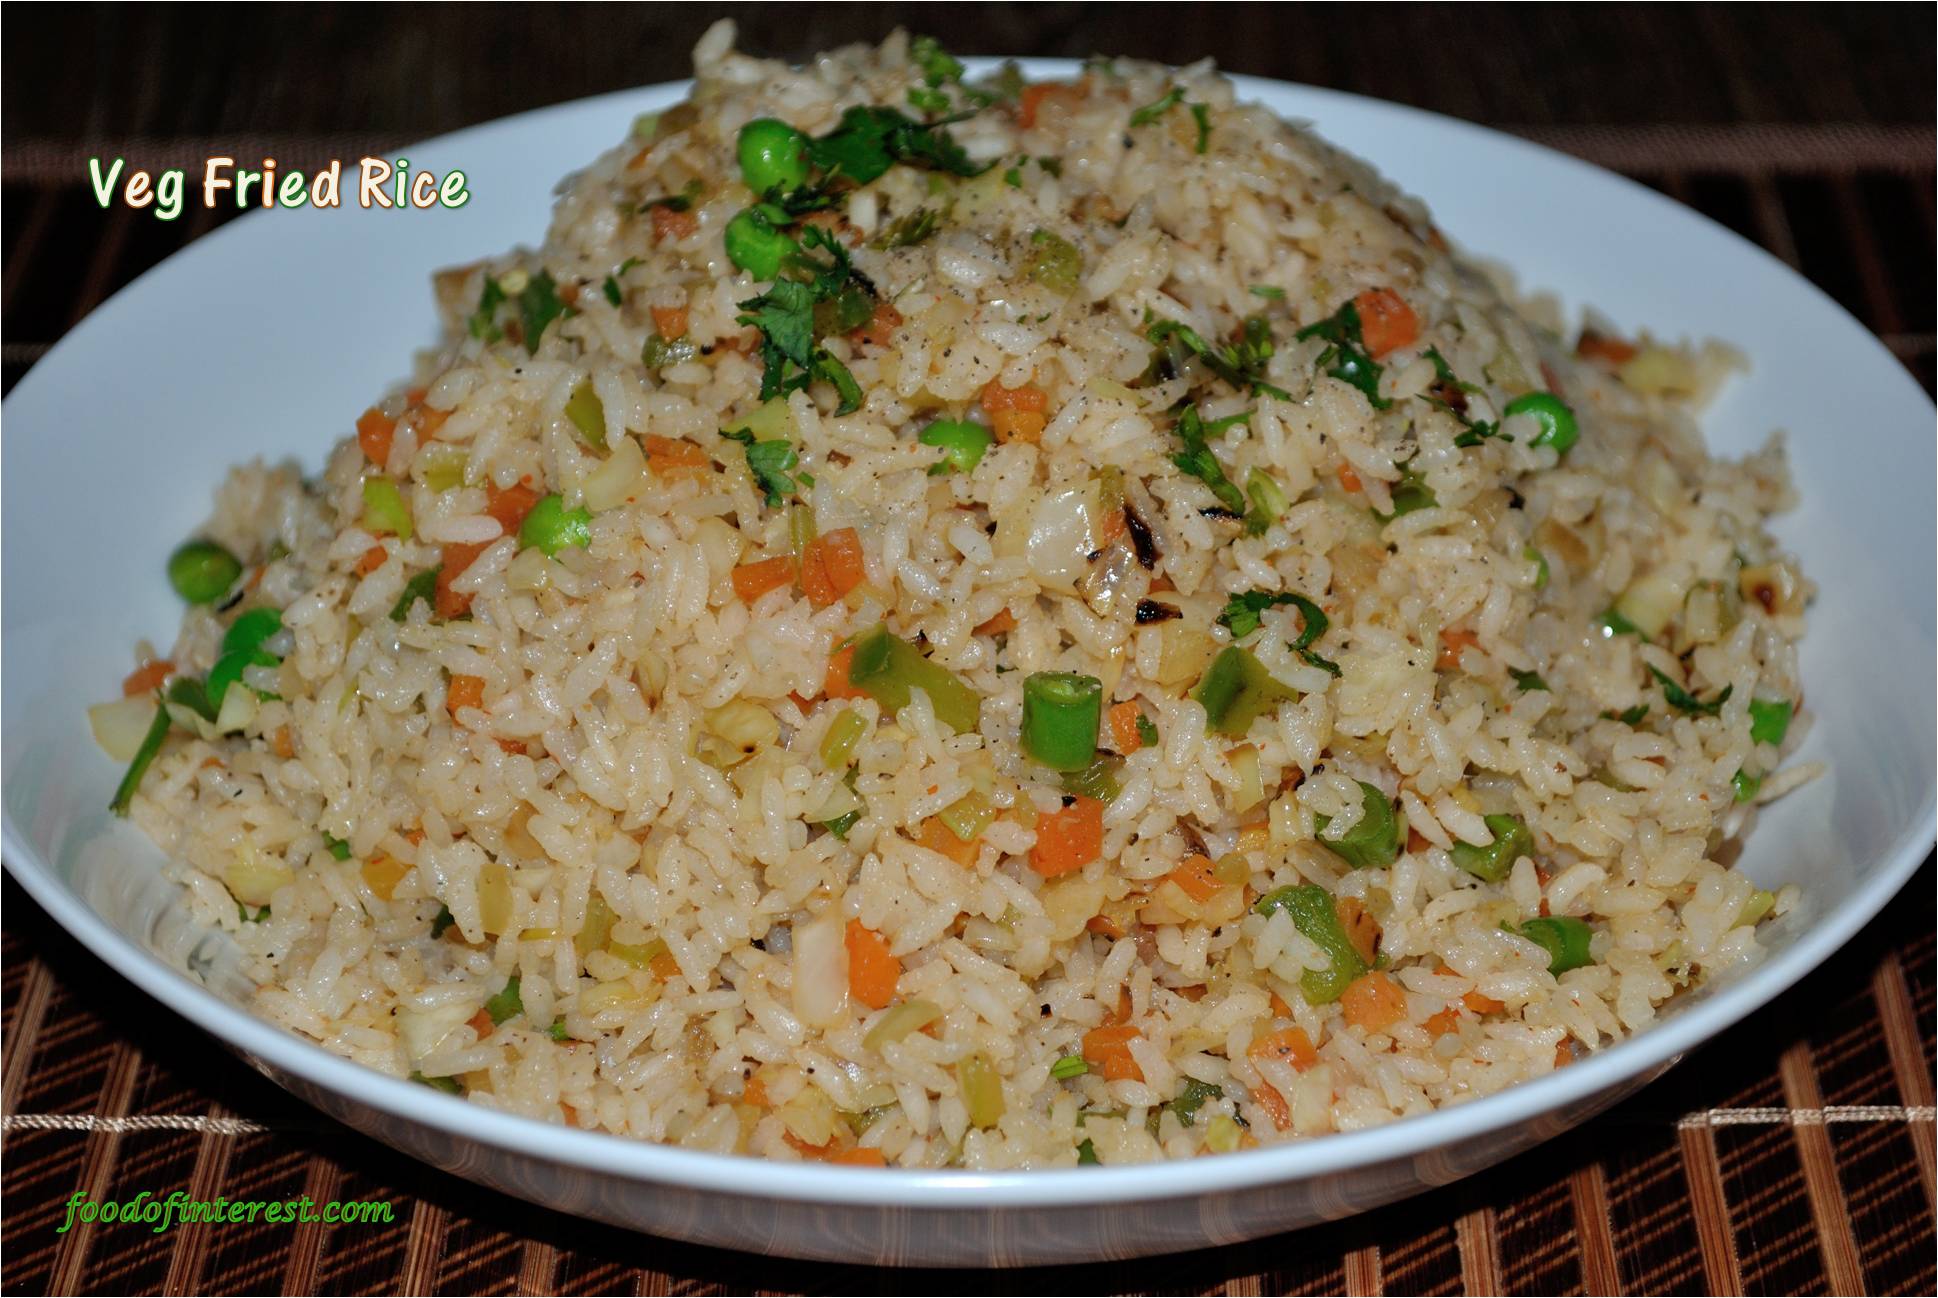 Veg Fried Rice | Fried Rice | Indo Chinese Recipes - Food Of Interest